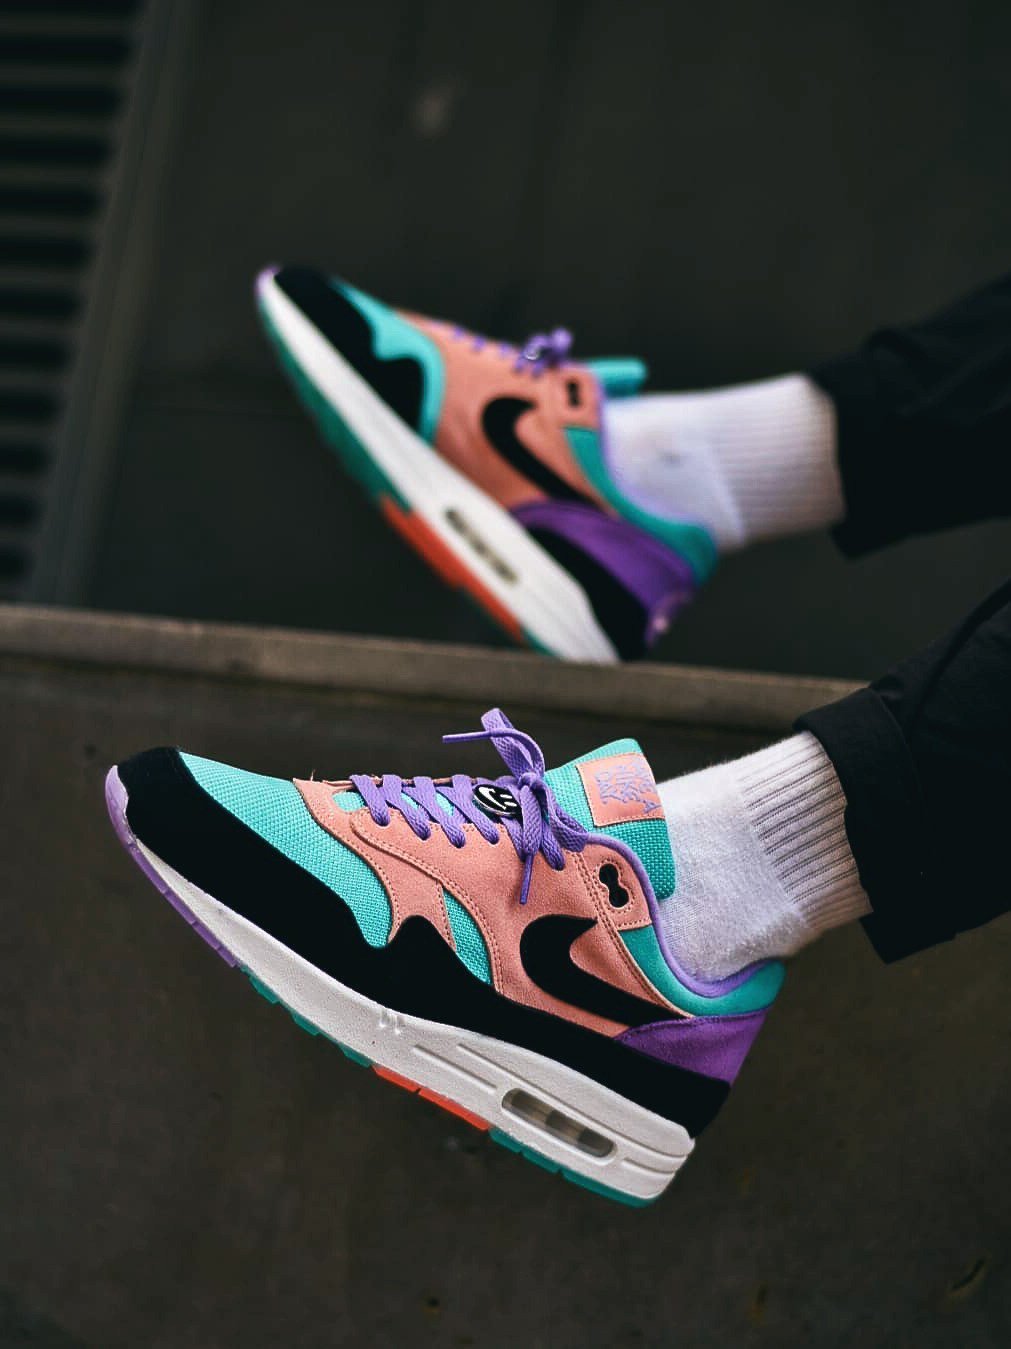 Sneaker Steal Twitter: "NIKE AIR MAX 'HAVE A NIKE DAY' $90.00 FREE SHIPPING https://t.co/7SE9wxZKbX https://t.co/e2R5wEC9fg" / Twitter